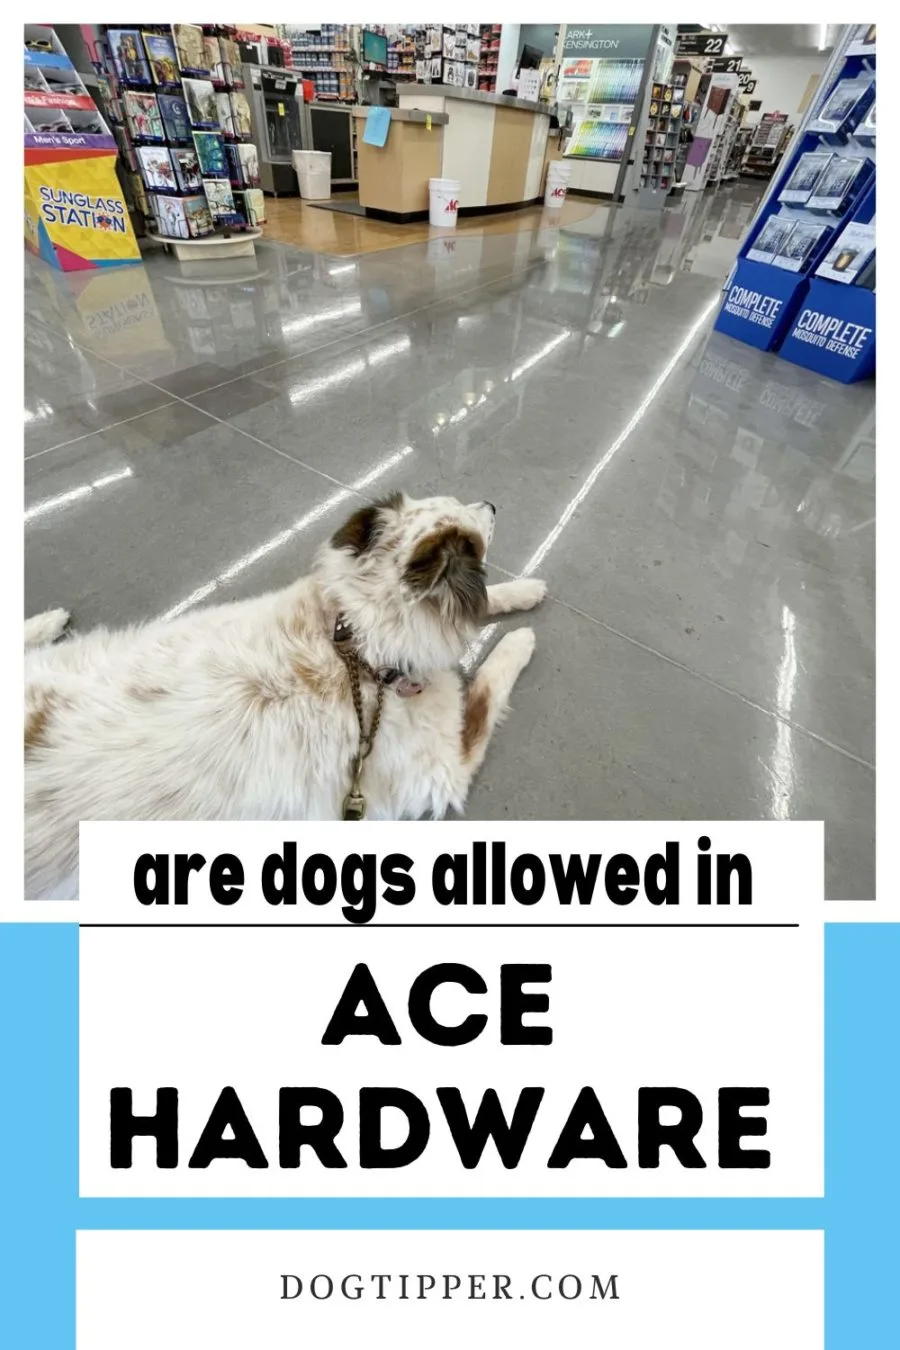 Are dogs allowed in Ace Hardware stores?